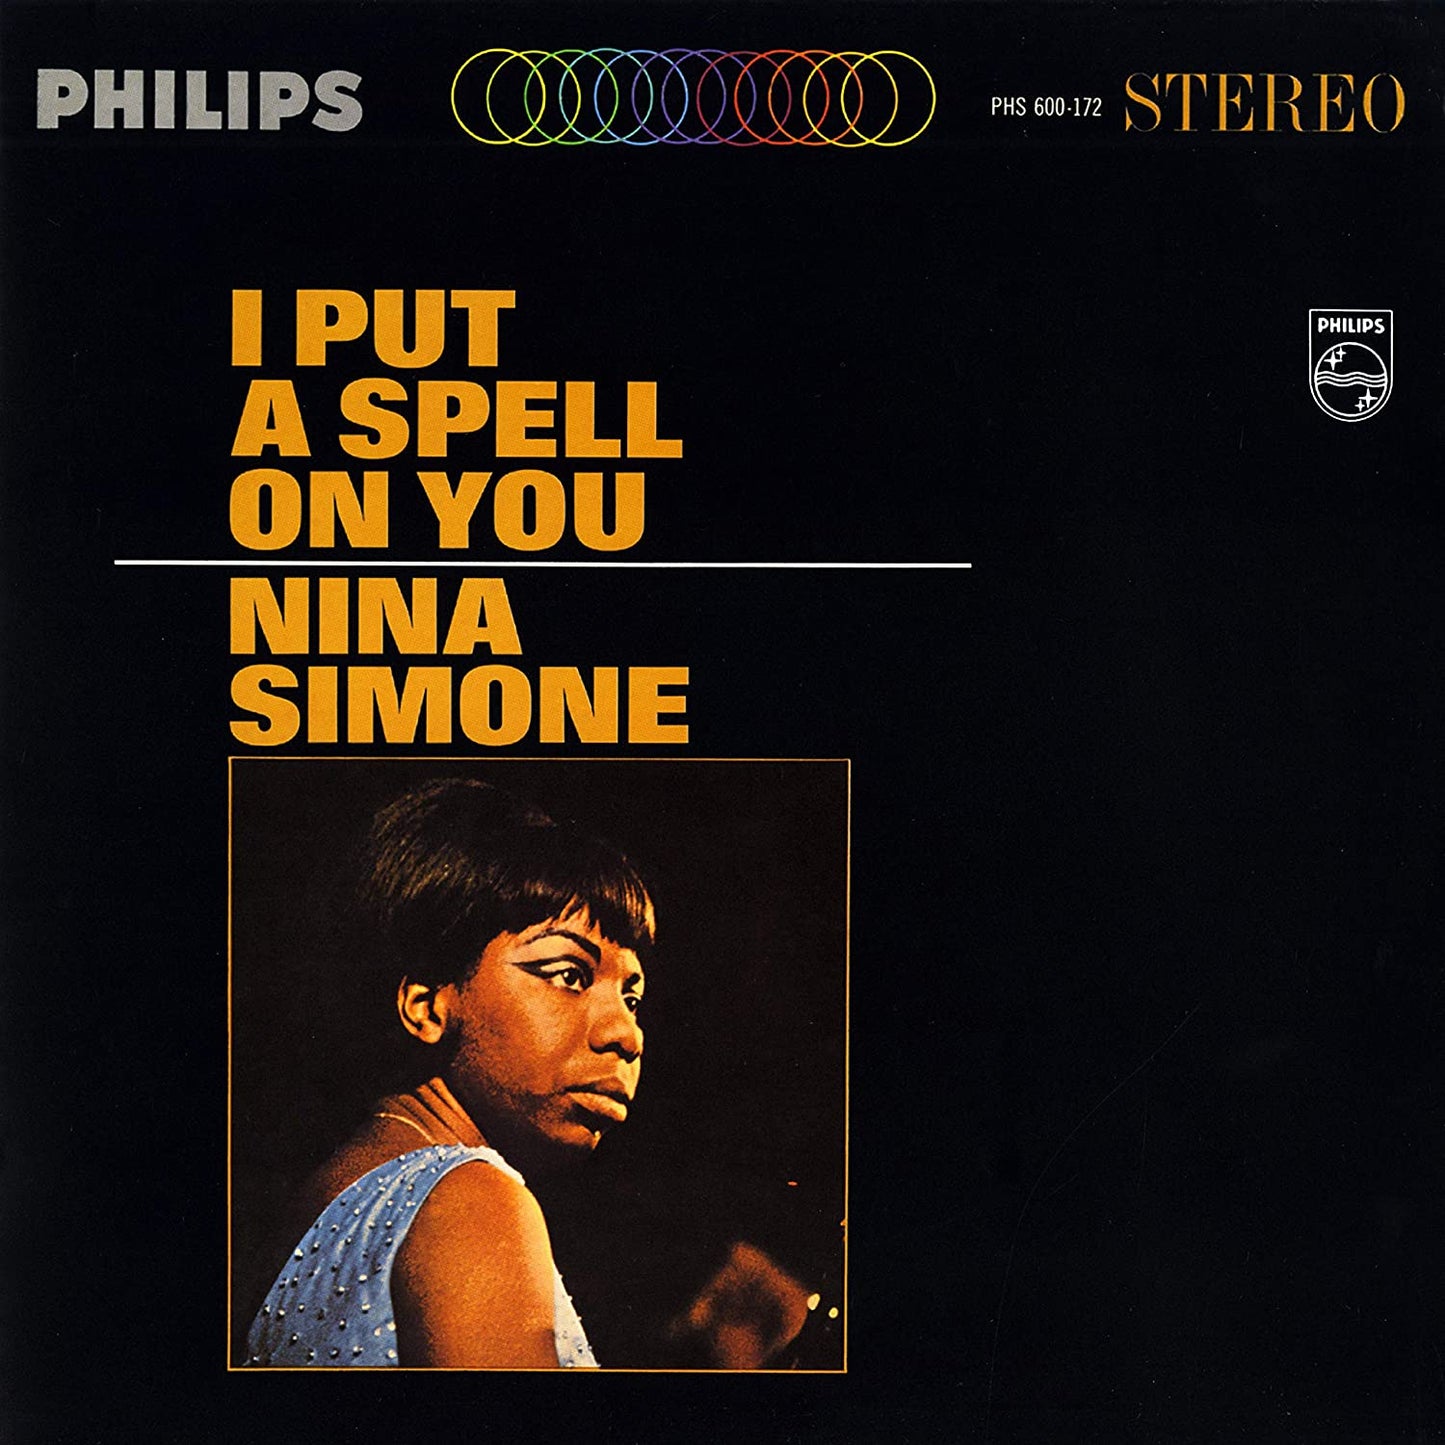 'I Put a Spell on You' is the 1965 album on Vinyl by Nina Simone, and features some of her best known songs. 'I Put a Spell on You' is a song originally by Screamin' Jay Hawkins. The original version gave the song an ironic theme, but Simone transformed it into a thrilling love song, complete with horns and strings.